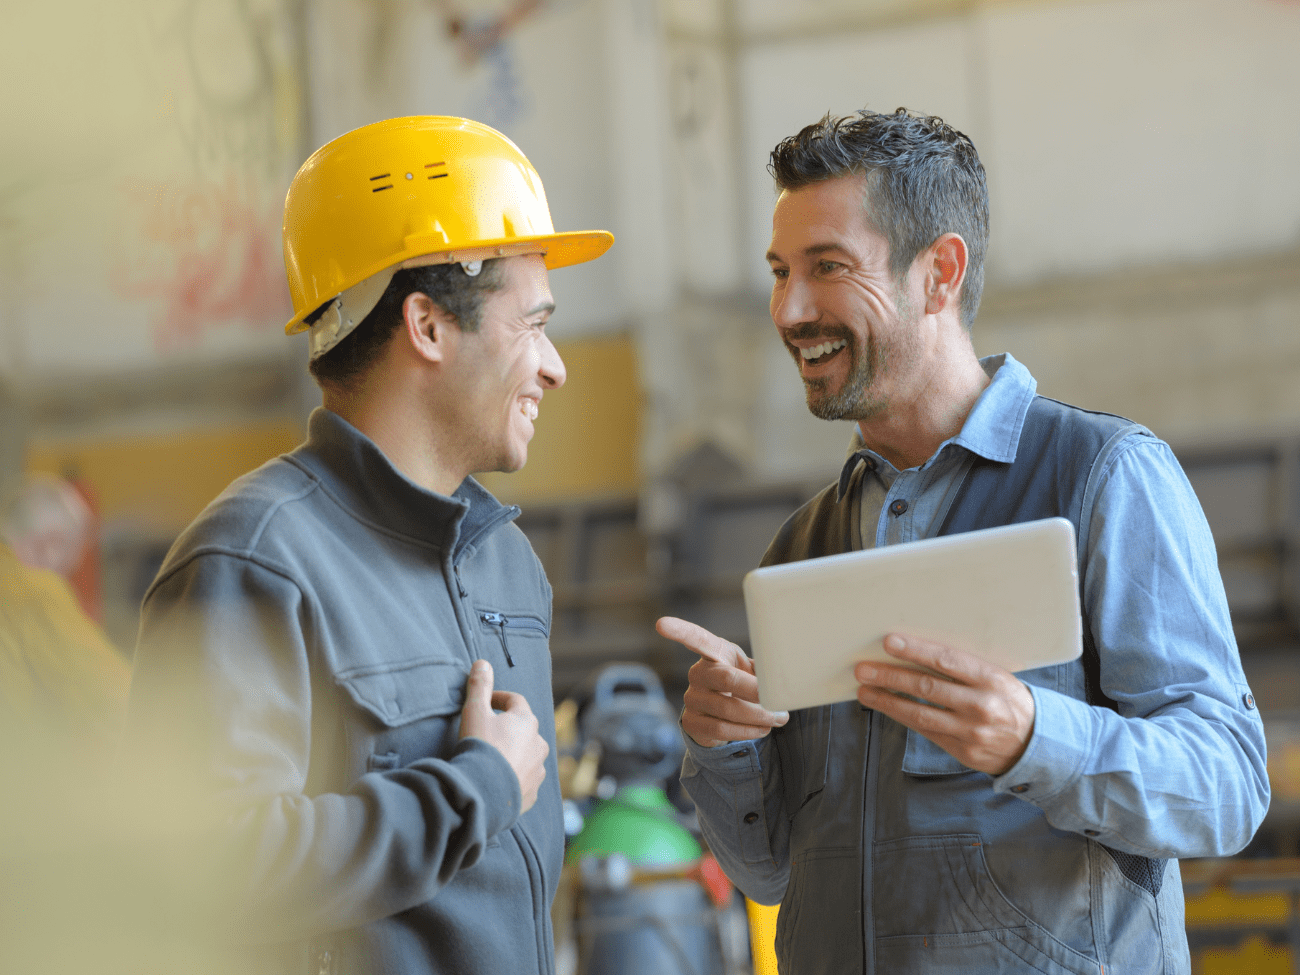 Man In Hard Hat And Man With Tablet Smiling